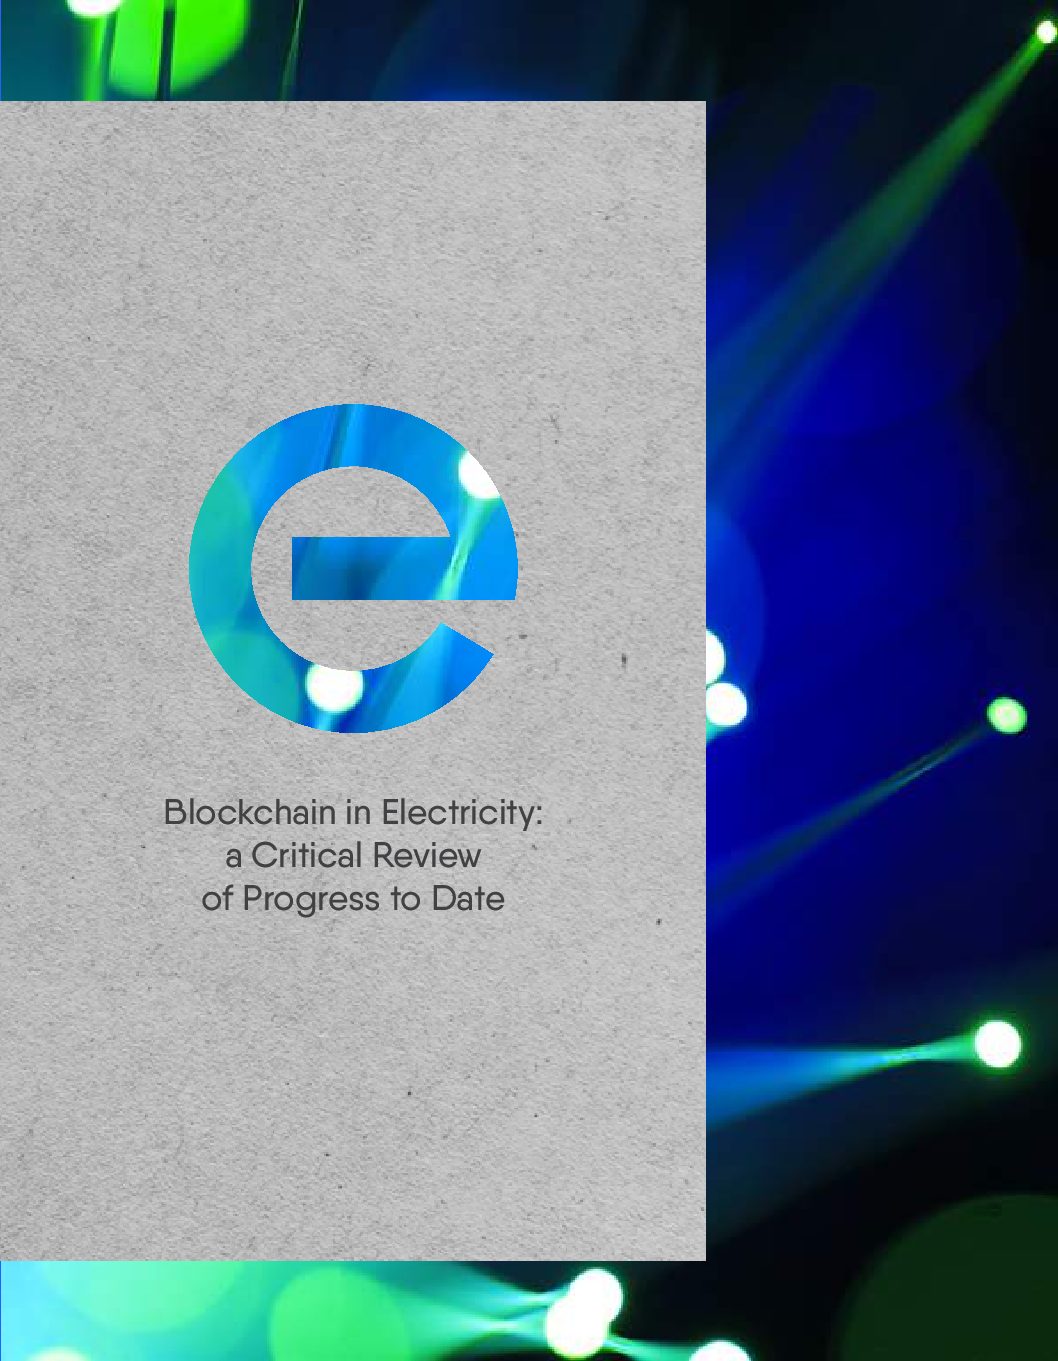 Blockchain in Electricity: a Critical Review of Progress to Date